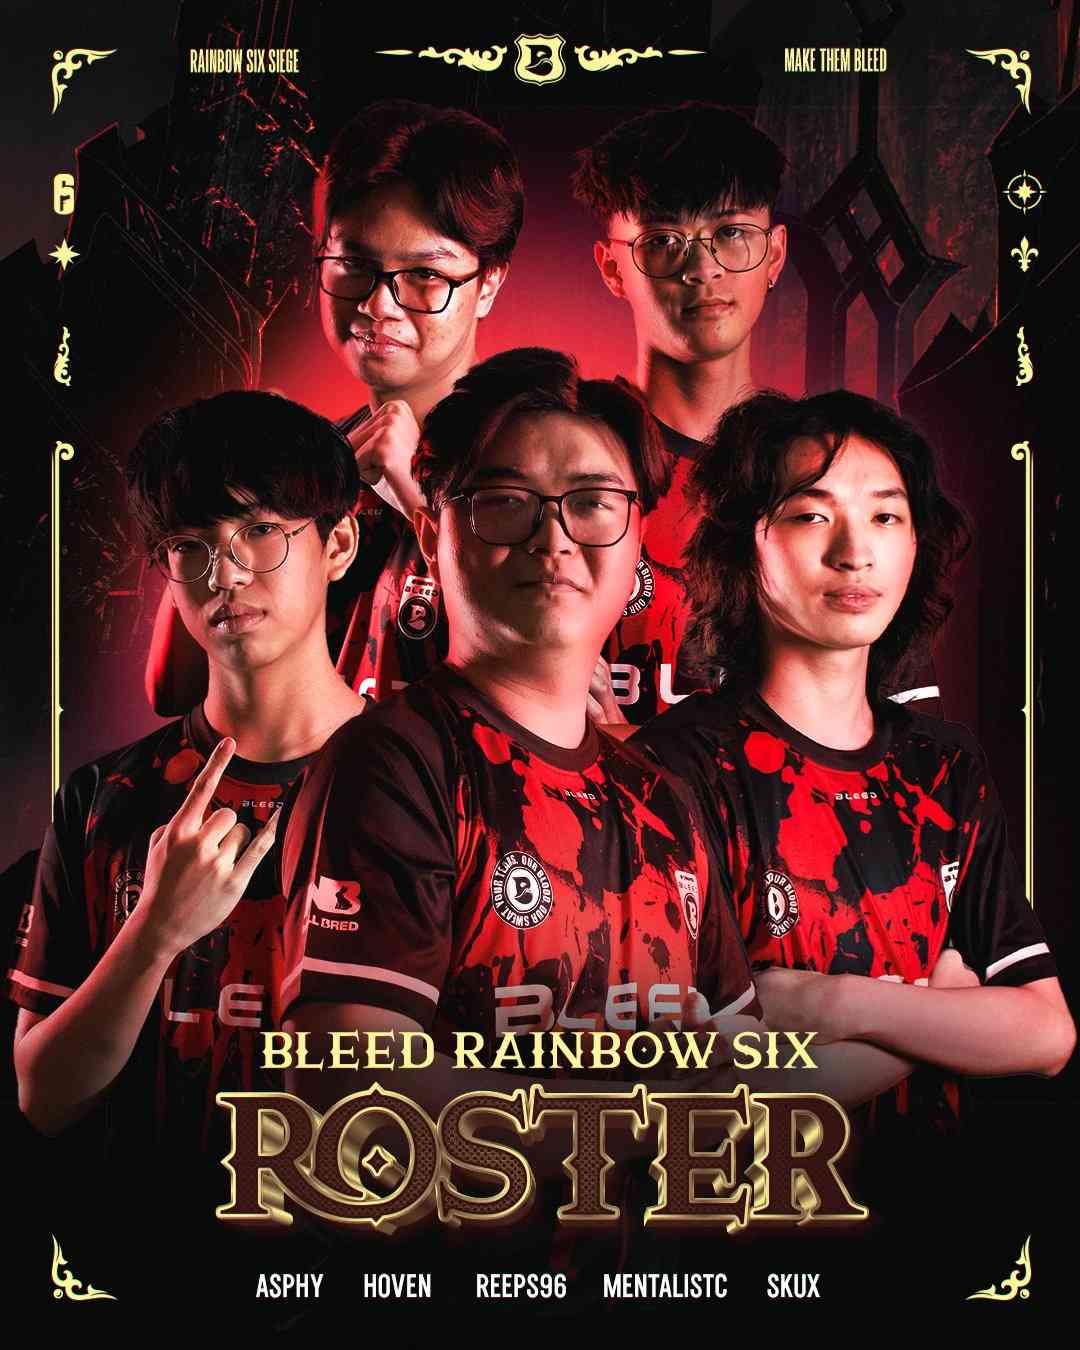 Picture of Bleed Esports' Rainbow Six Roster. Credit: Bleed Esports